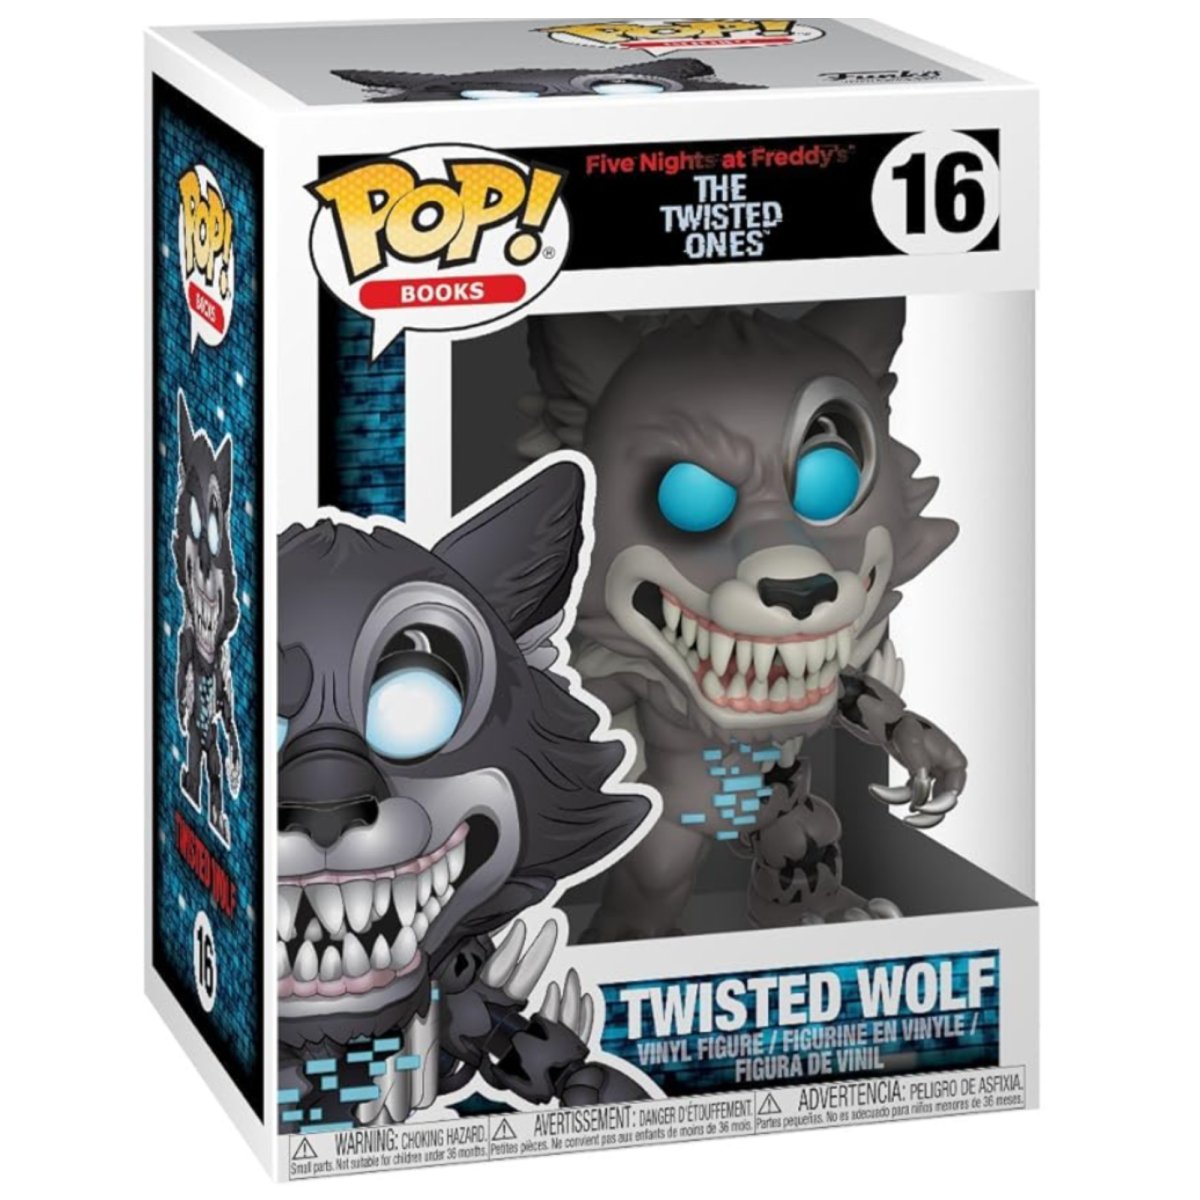 Five Nights at Freddy's The Twisted Ones - Twisted Wolf #16 - Funko Pop! Vinyl Games - Persona Toys